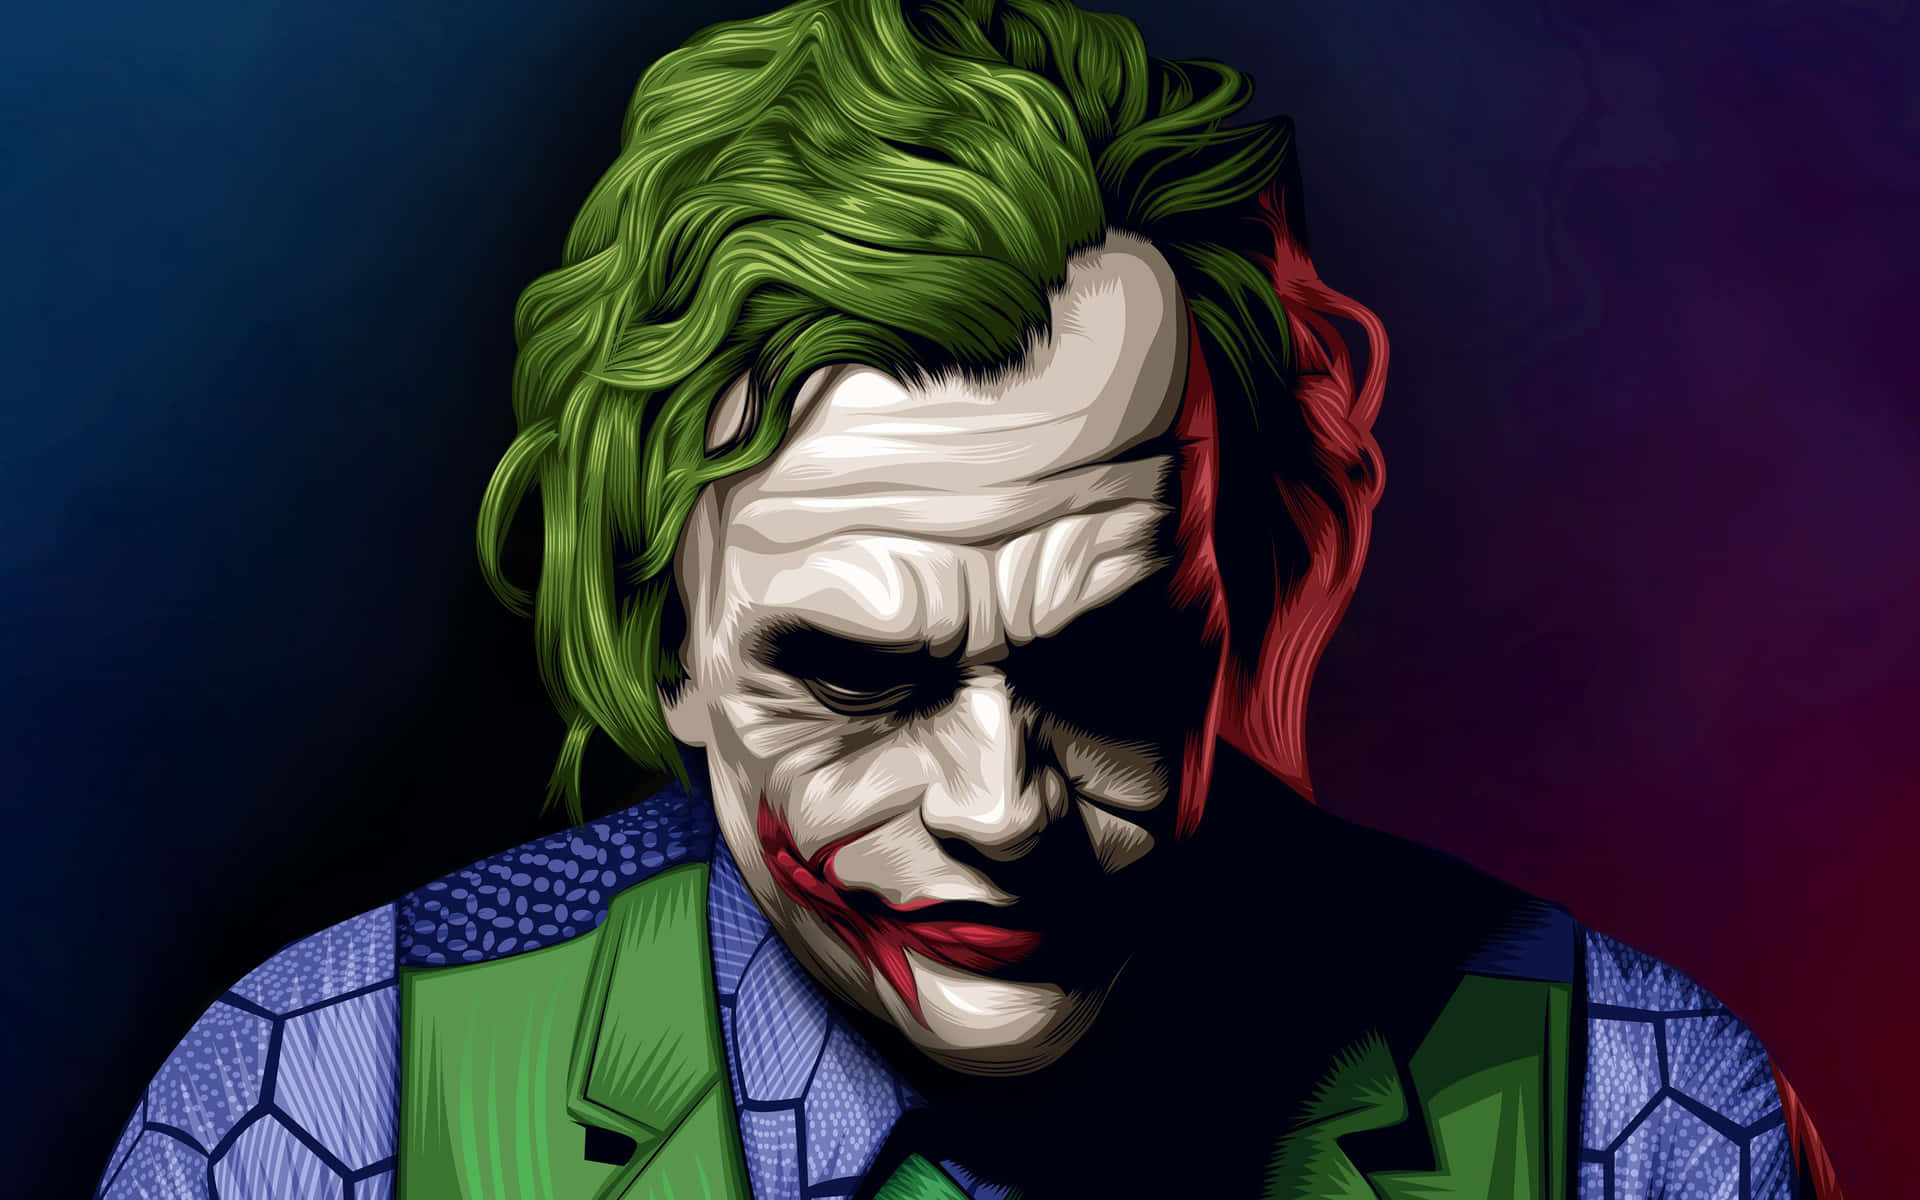 Artistic Expression of the Joker in Paint Wallpaper